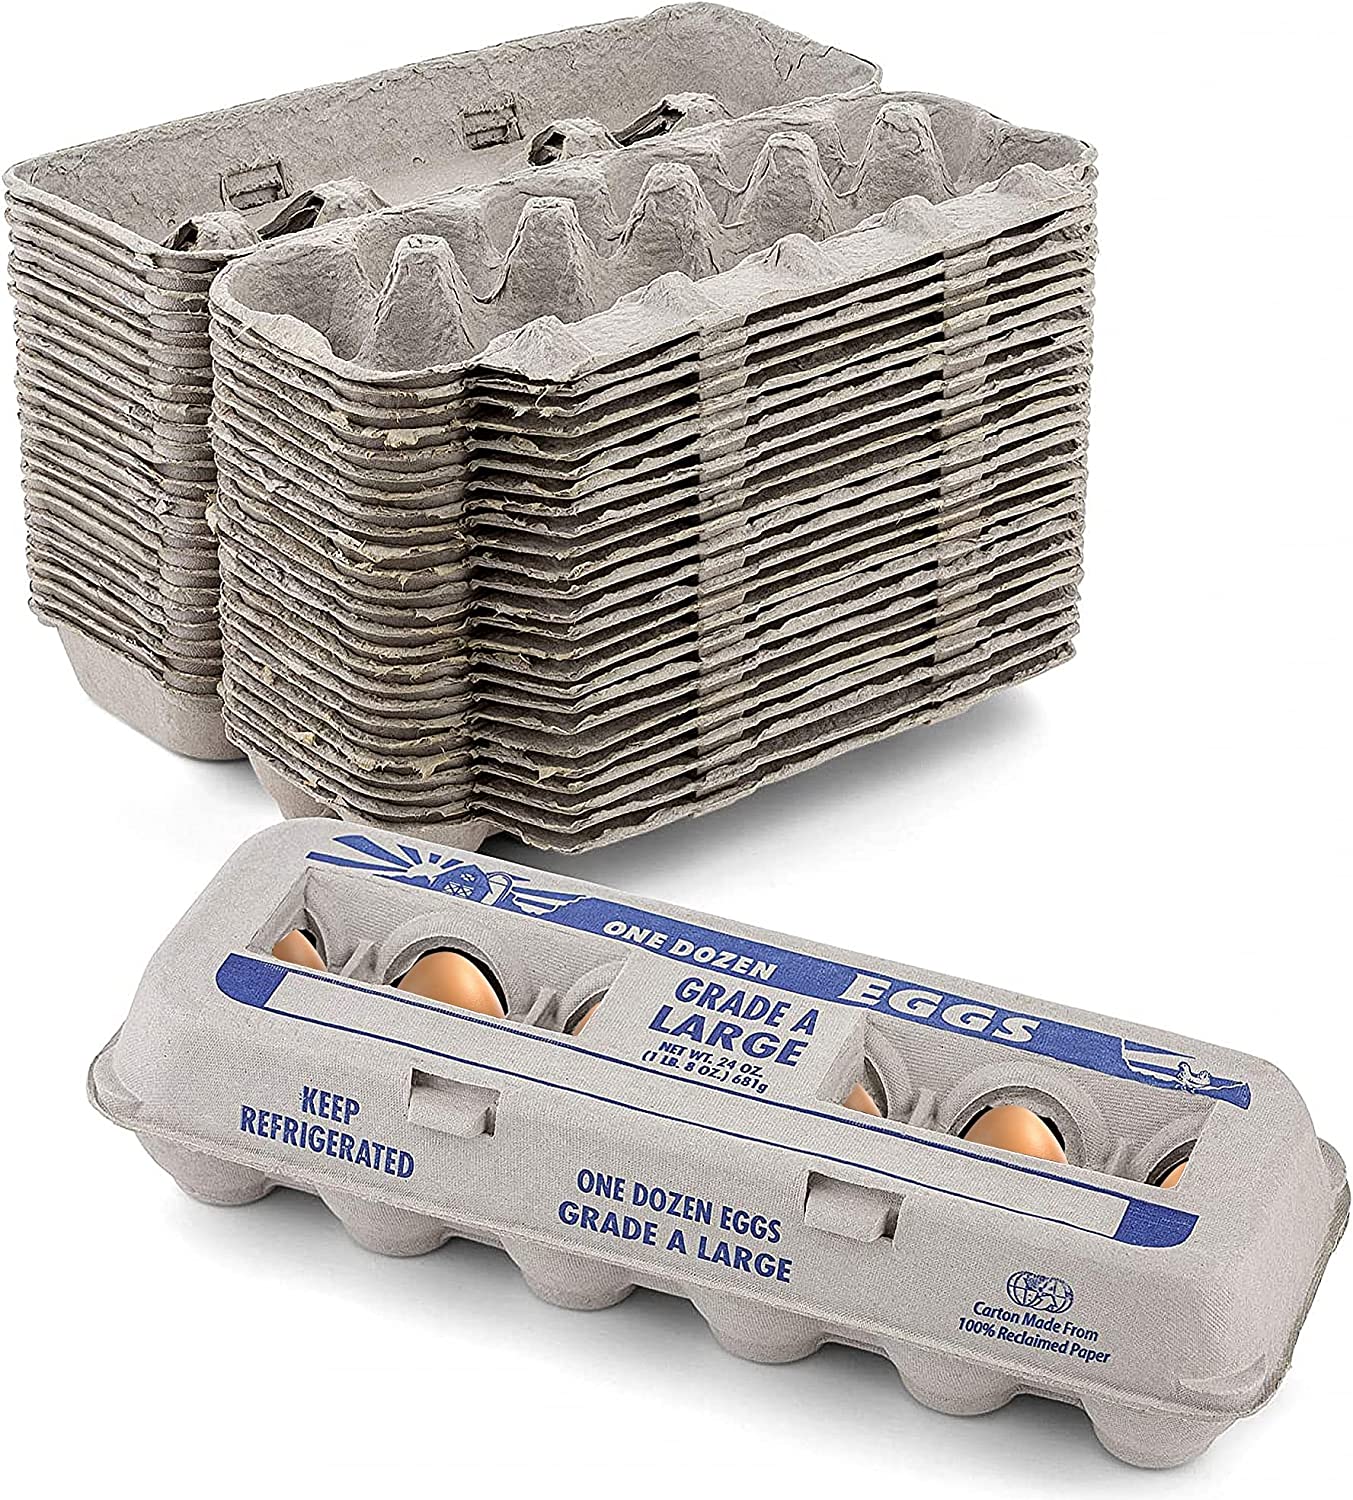 MT Products Printed Natural Pulp Large Egg Cartons (Holds 1 Dozen eggs) - 15